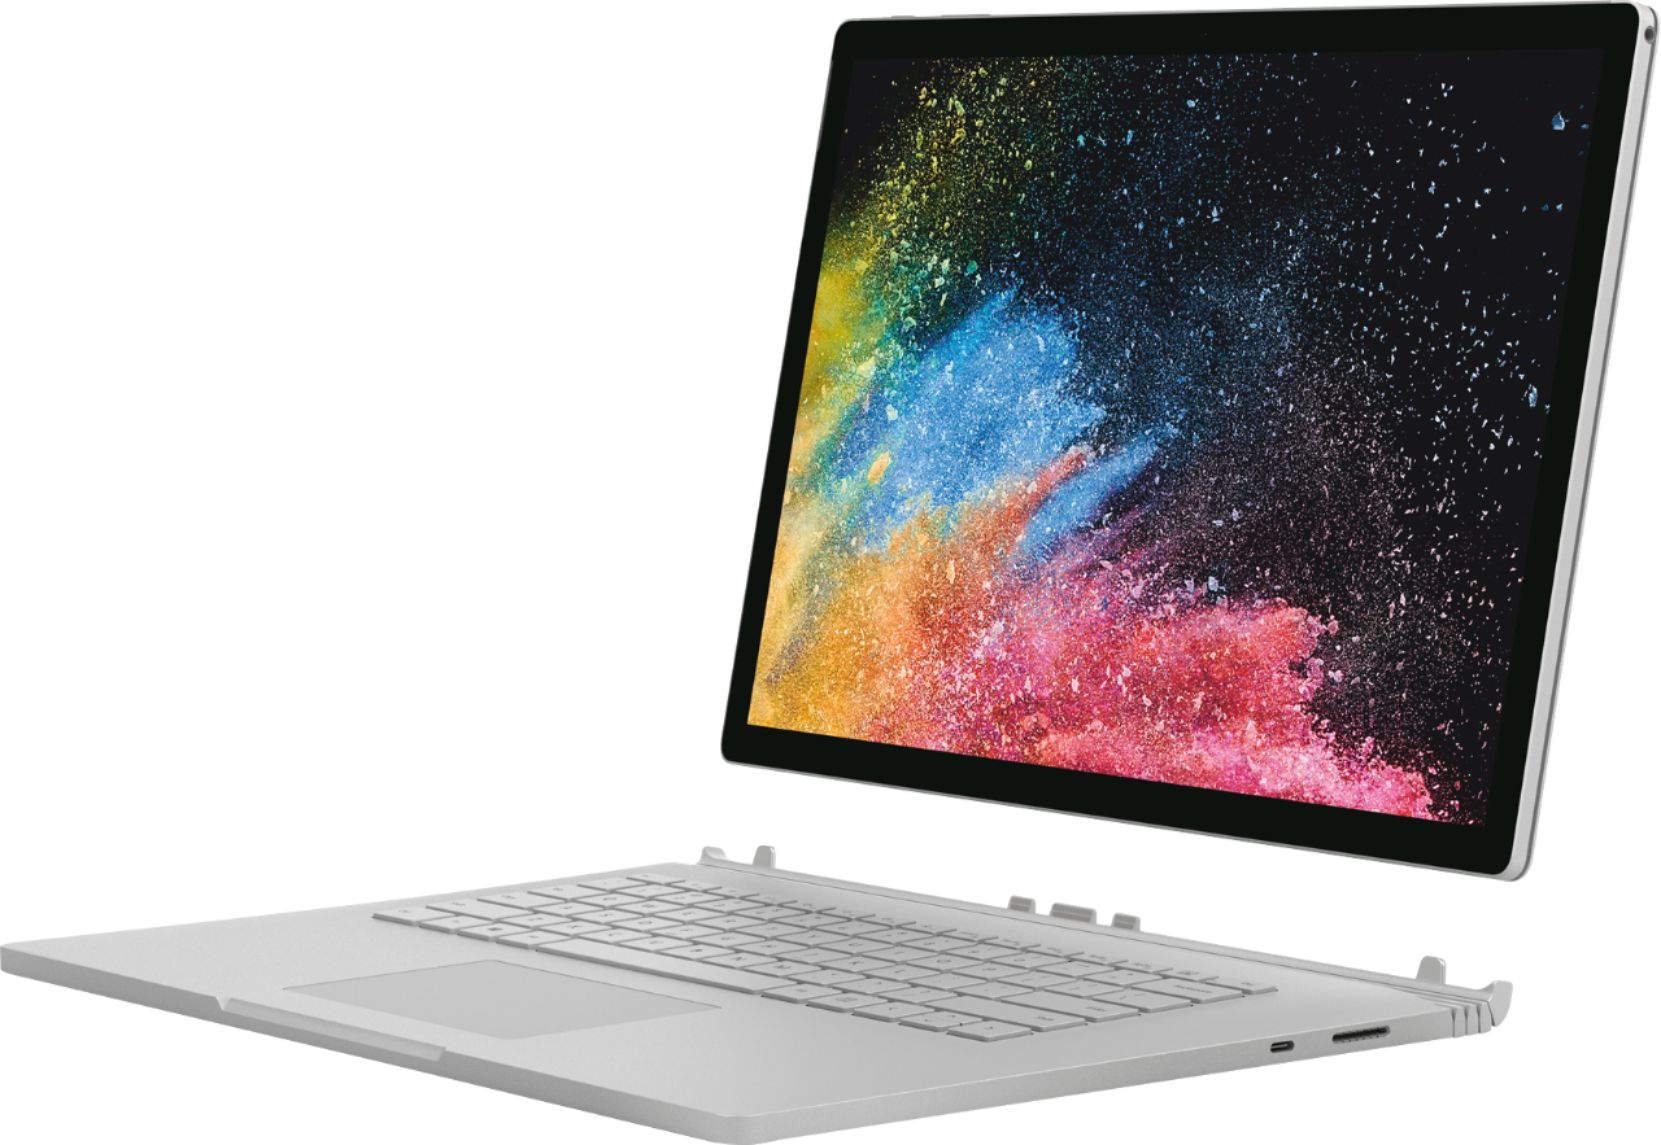 Angle View: Microsoft - Geek Squad Certified Refurbished Surface Book 2 - 15" Touch-Screen Laptop - Intel Core i7 - 16GB Memory - 1TB GB SSD - Platinum